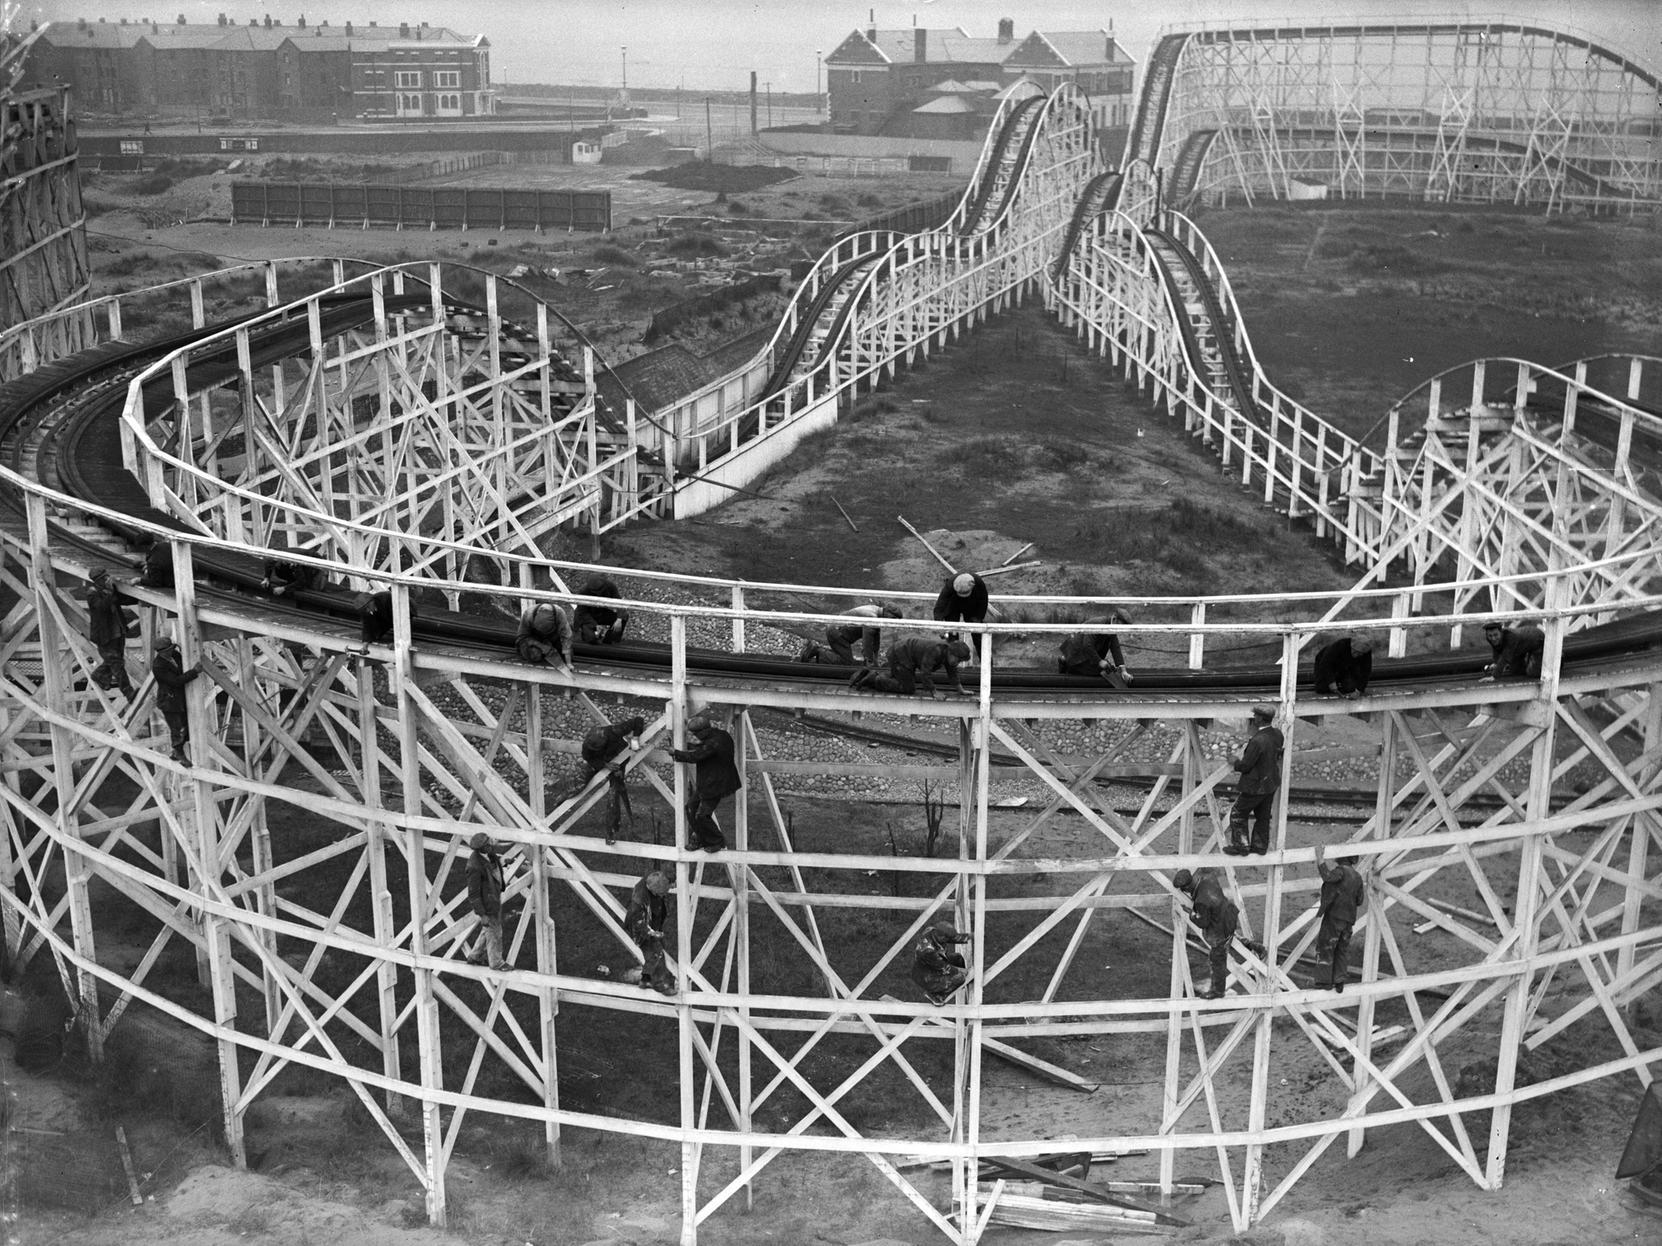 A wooden rollercoaster of 1923 by William H Strickler and John A Miller, altered by Charles Paige in 1935, Joseph Emberton in 1936 and Felix Samuely in 1953, and with later modifications.